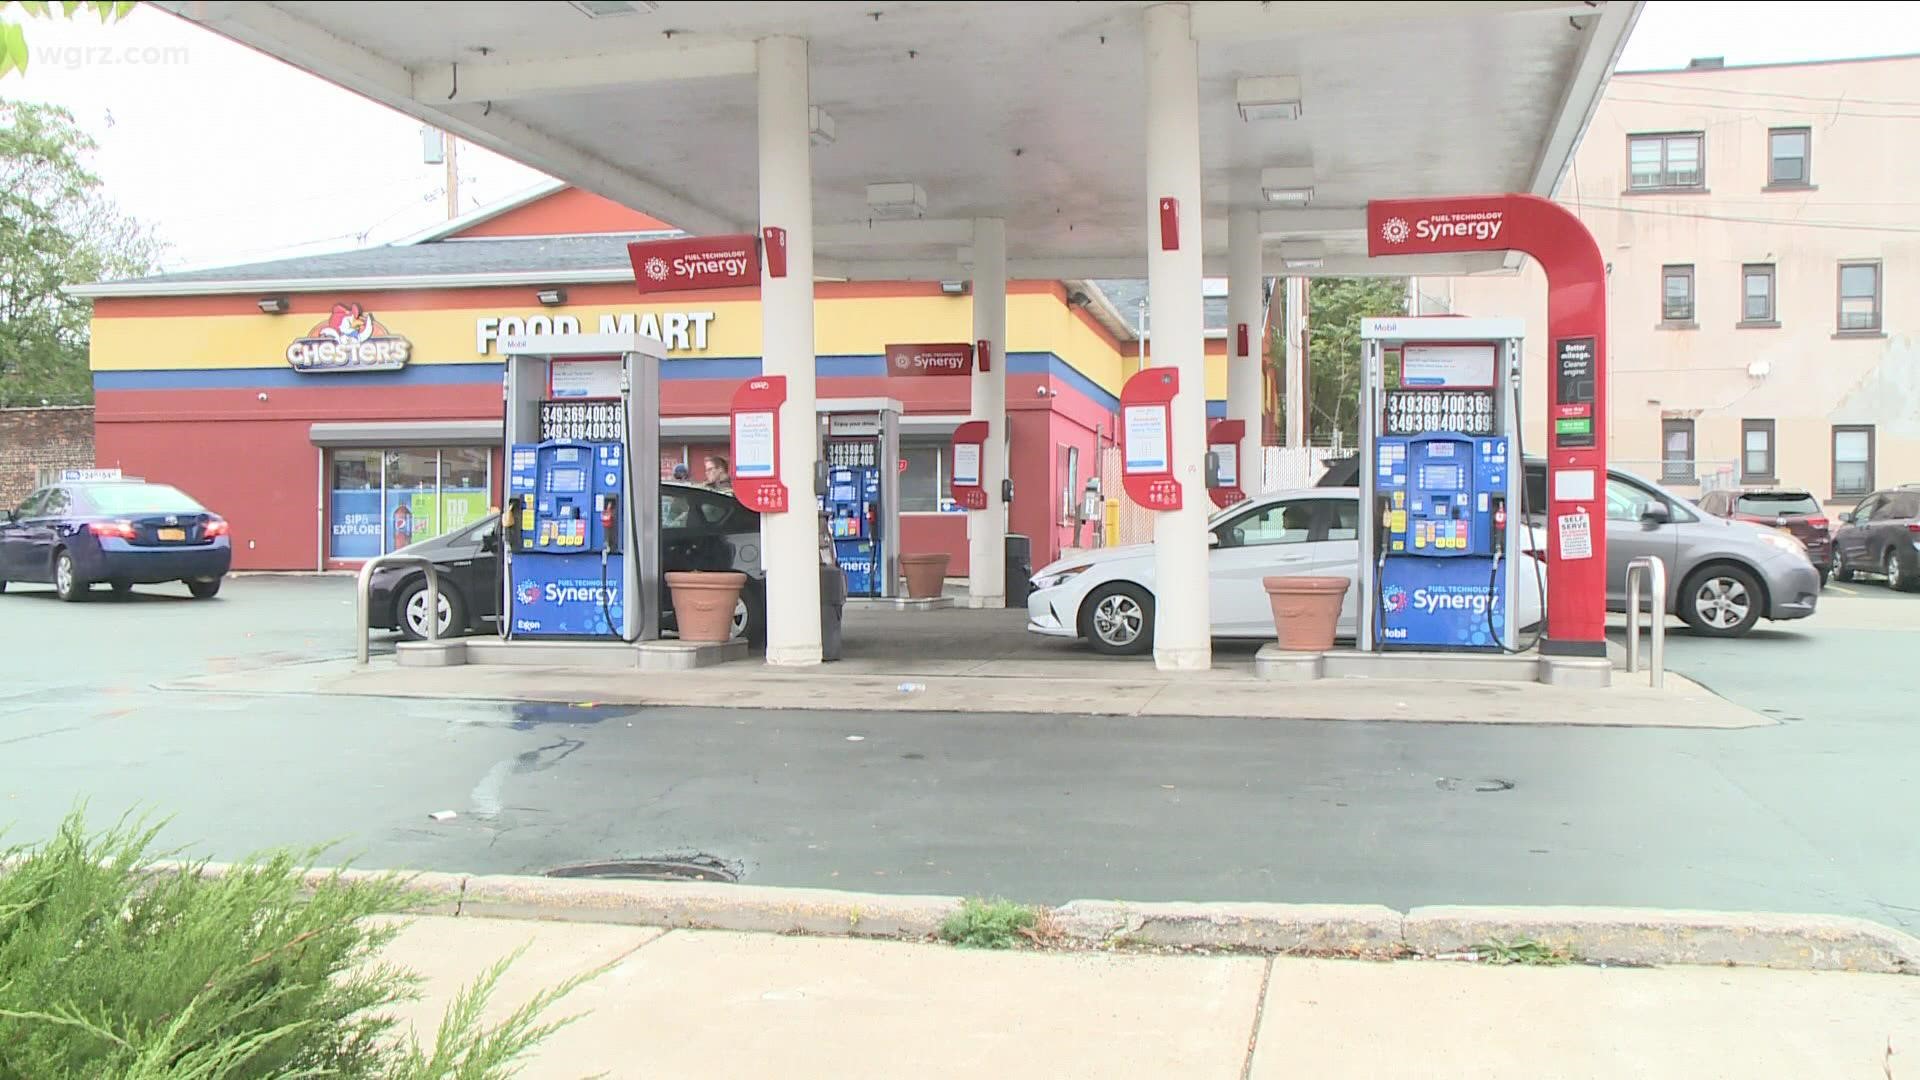 aaa-gas-prices-in-western-new-york-remain-stagnant-wgrz